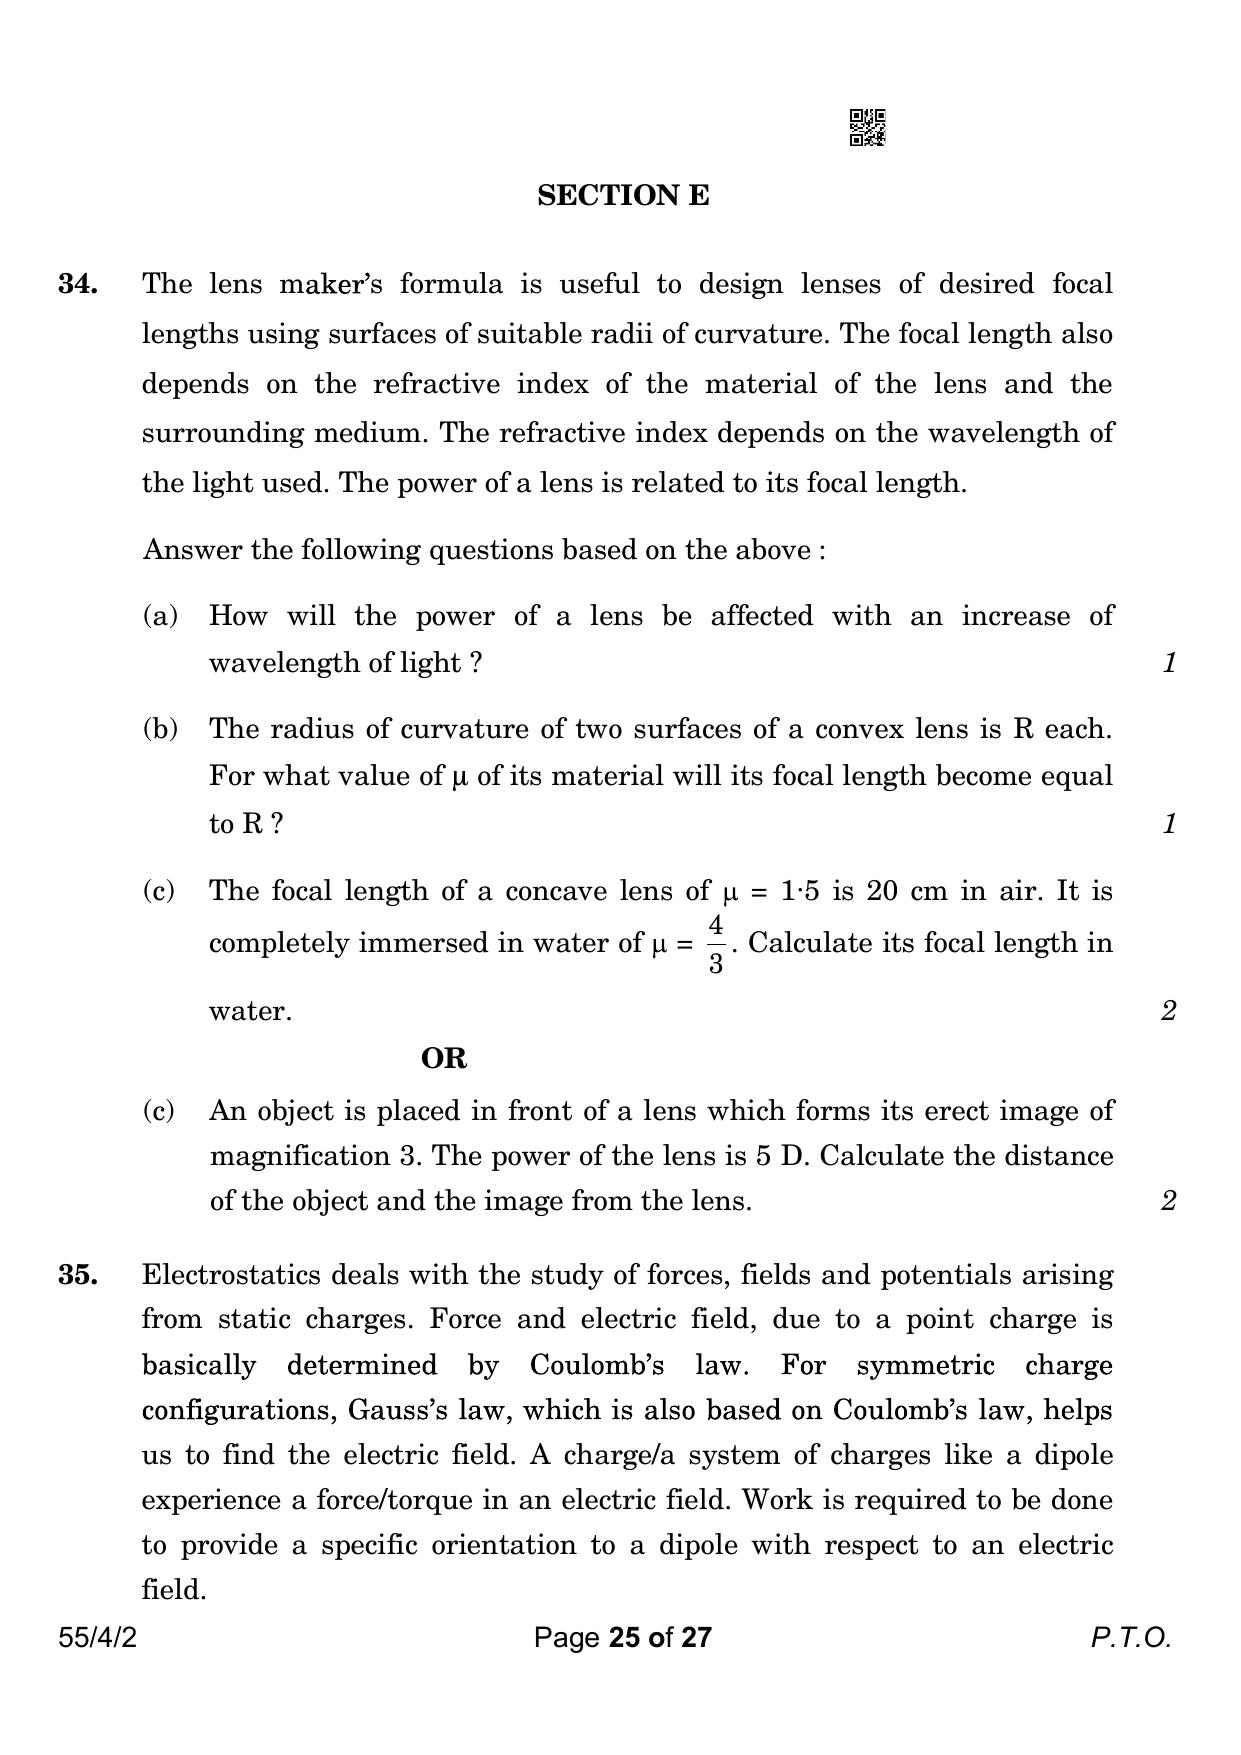 CBSE Class 12 55-4-2 Physics 2023 Question Paper - Page 25